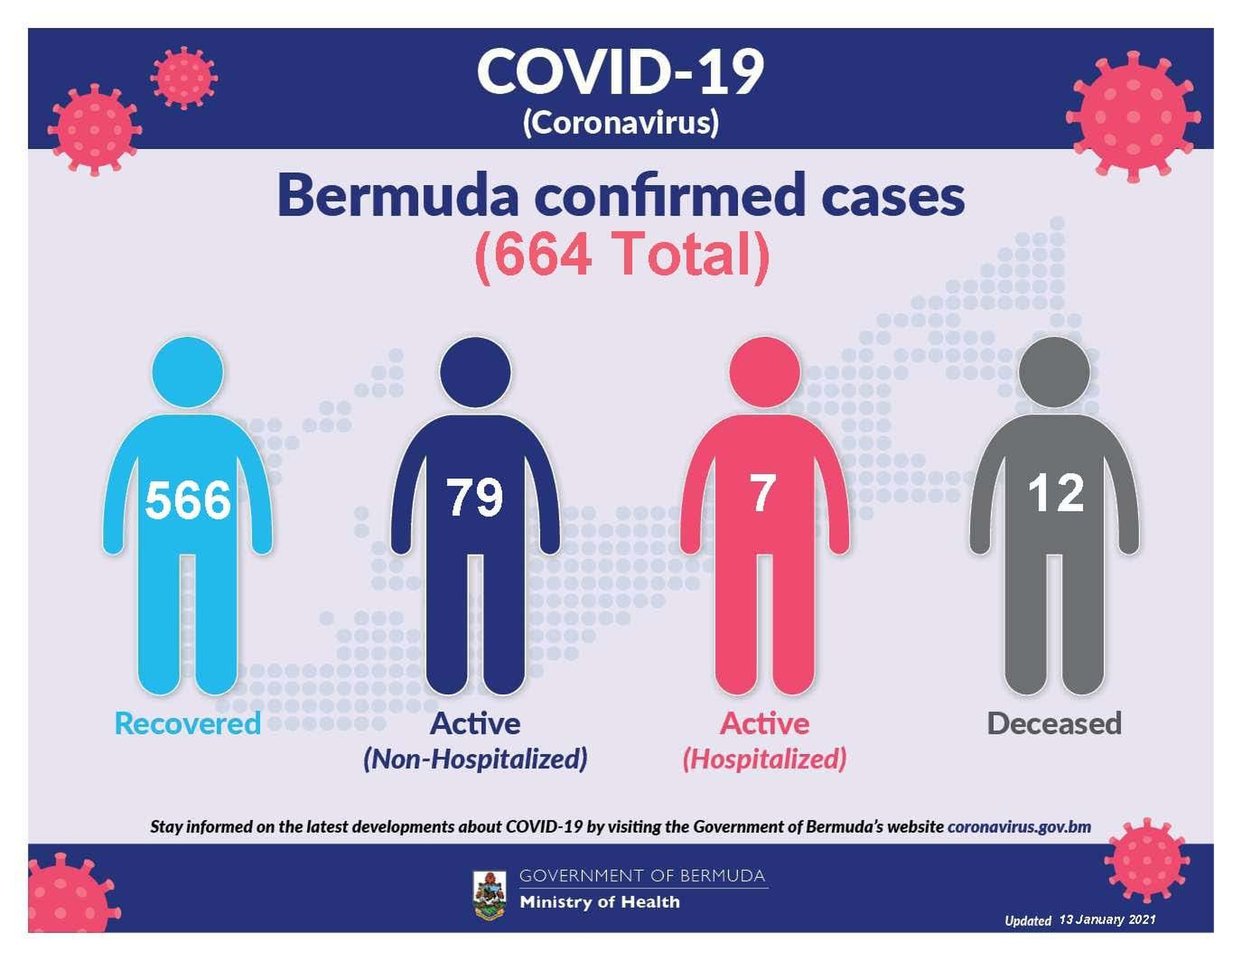 Three new (imported) COVID-19 cases reported in Bermuda, 13 January 2021